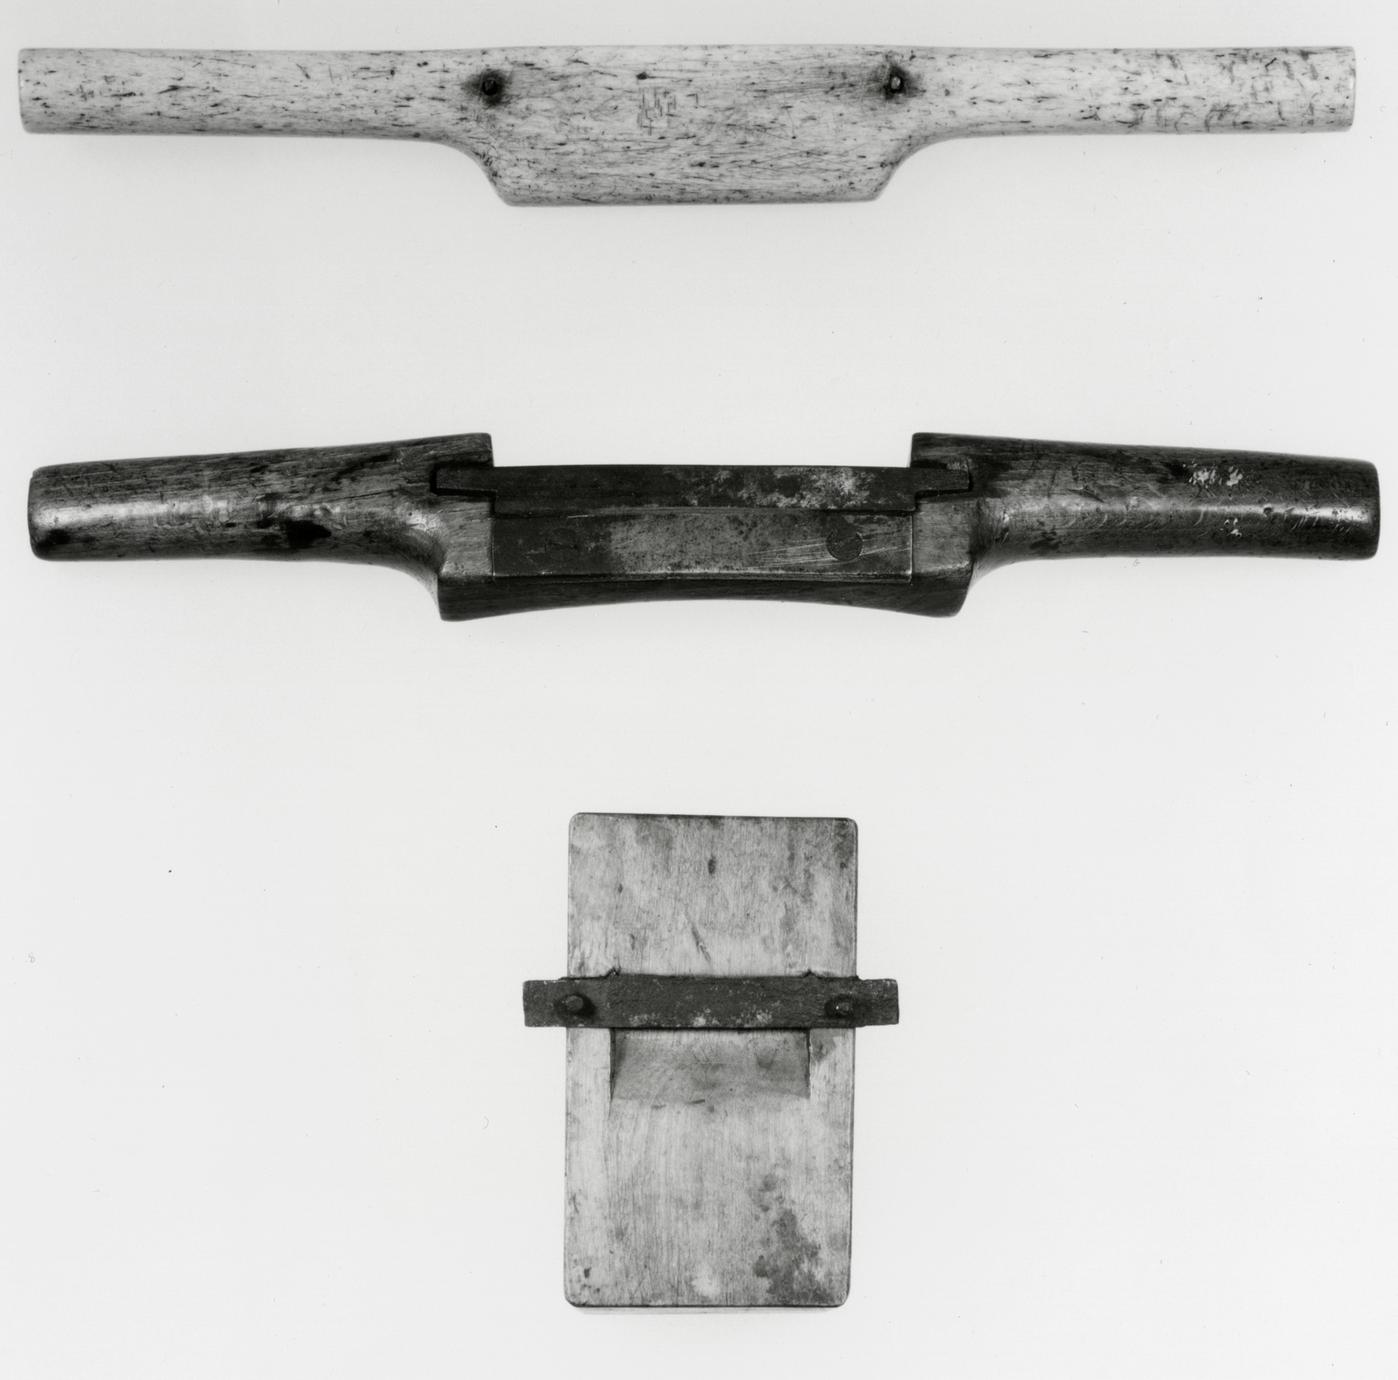 Black and white photograph of various spokeshaves.